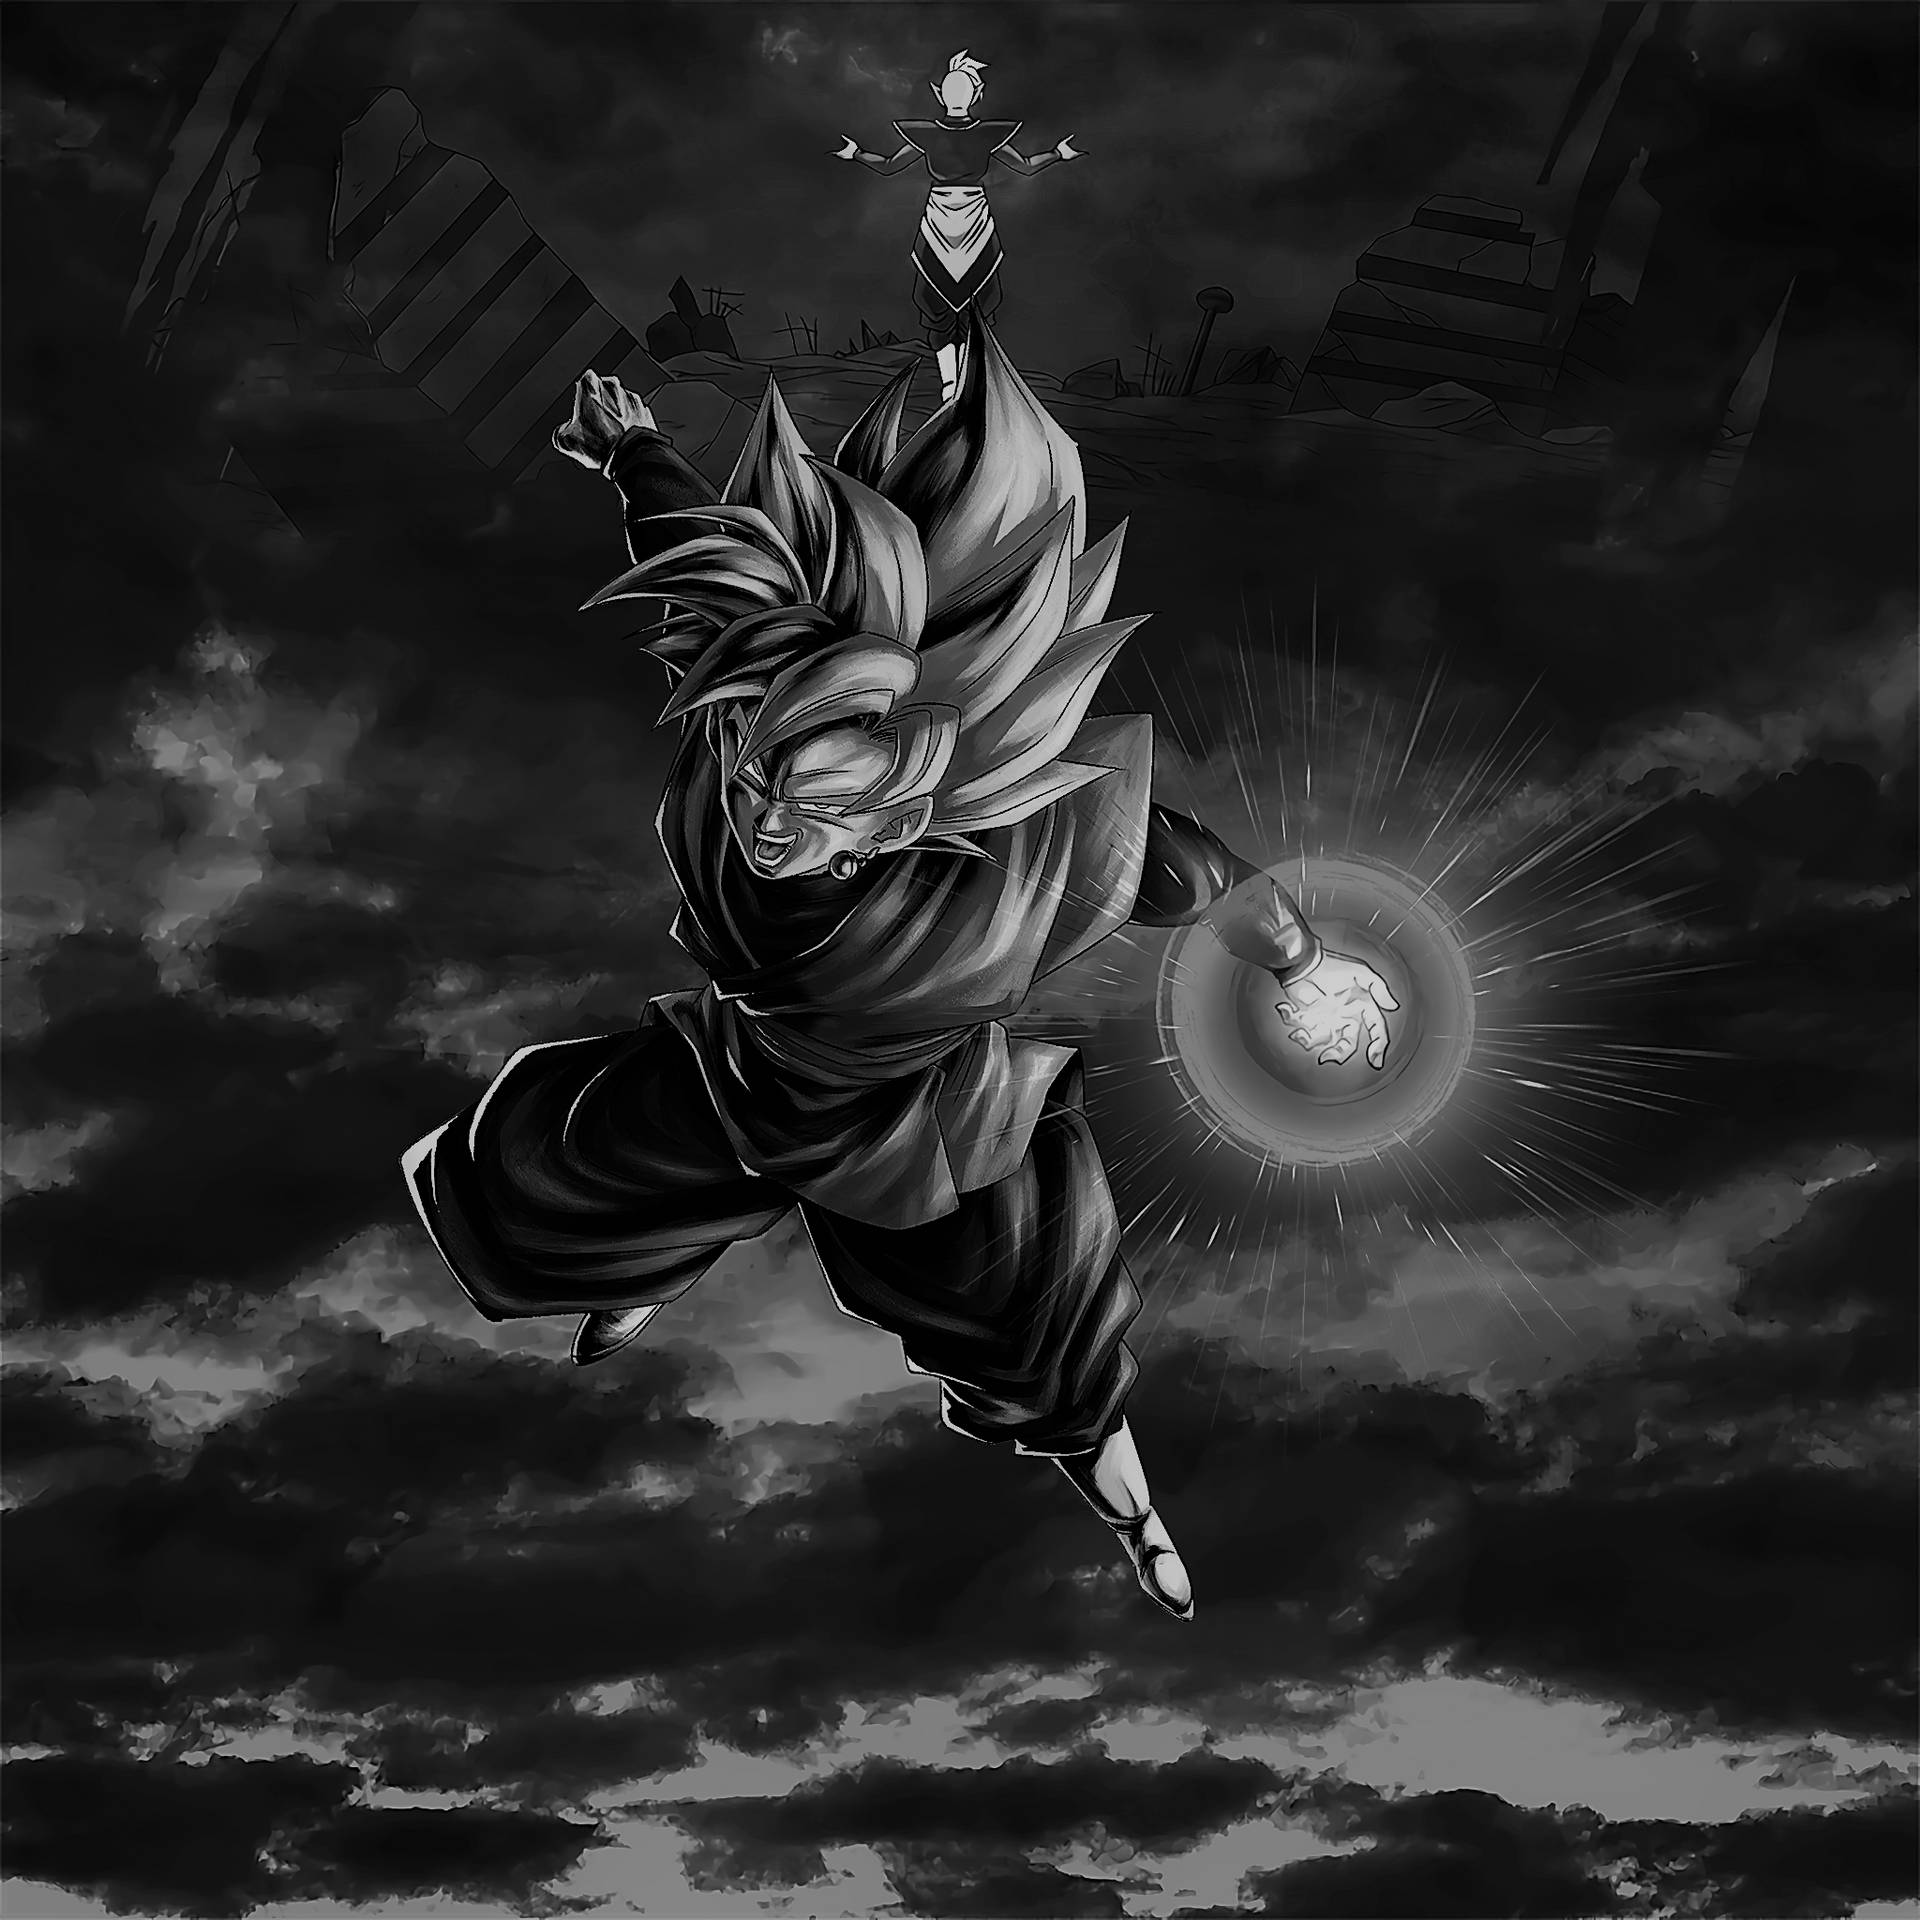 The Iconic Power of Goku in Black and White Wallpaper